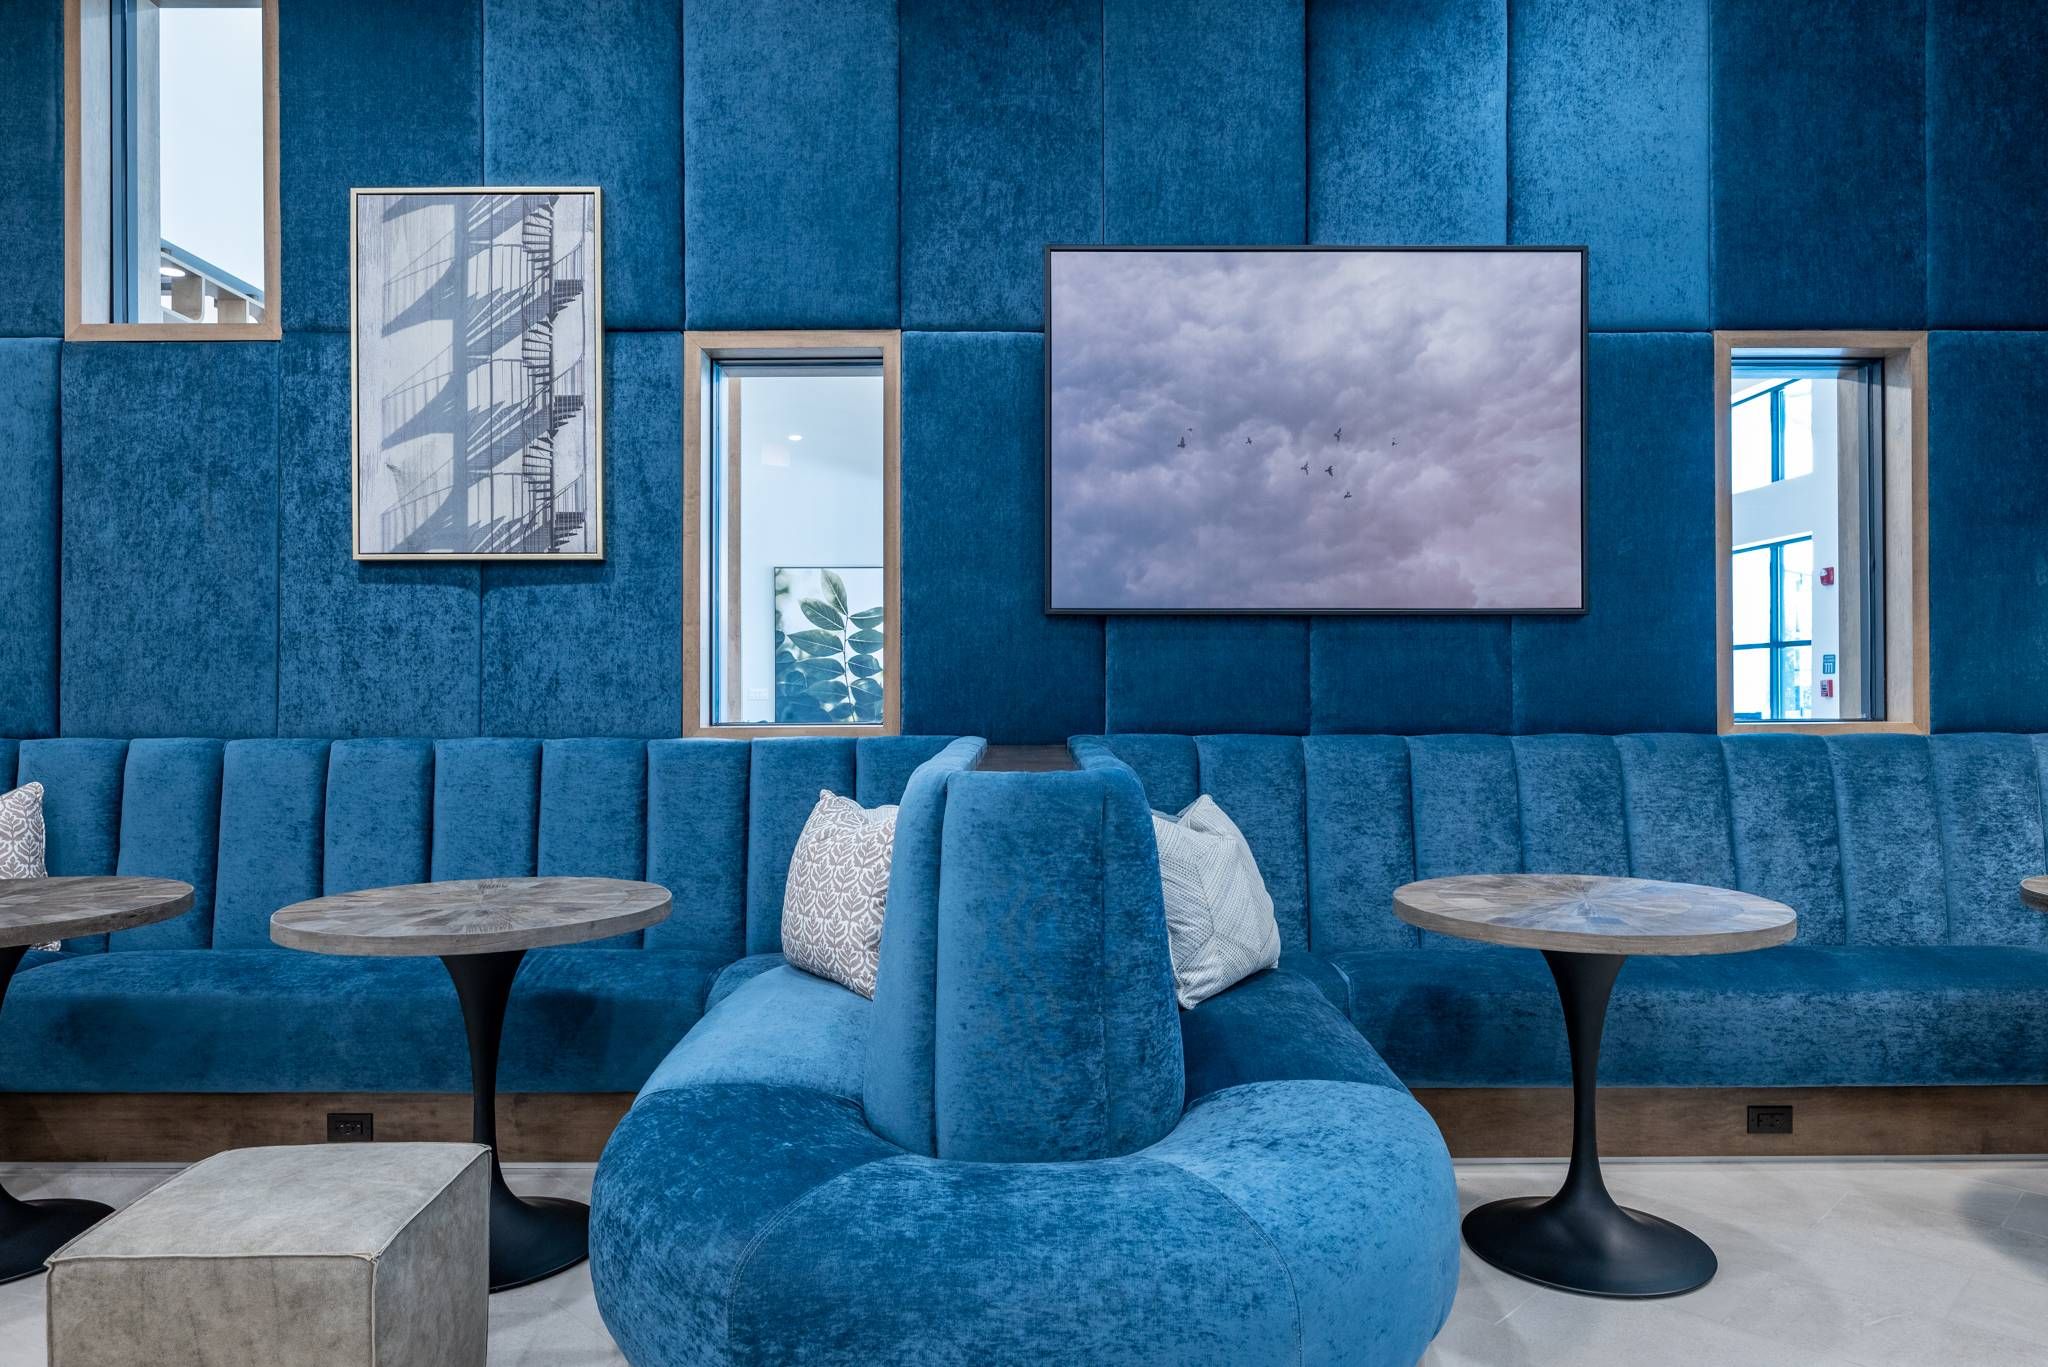 A cozy lounge area with plush blue sofas, stone-top tables, and vibrant wall art at Alta at Horizon West.